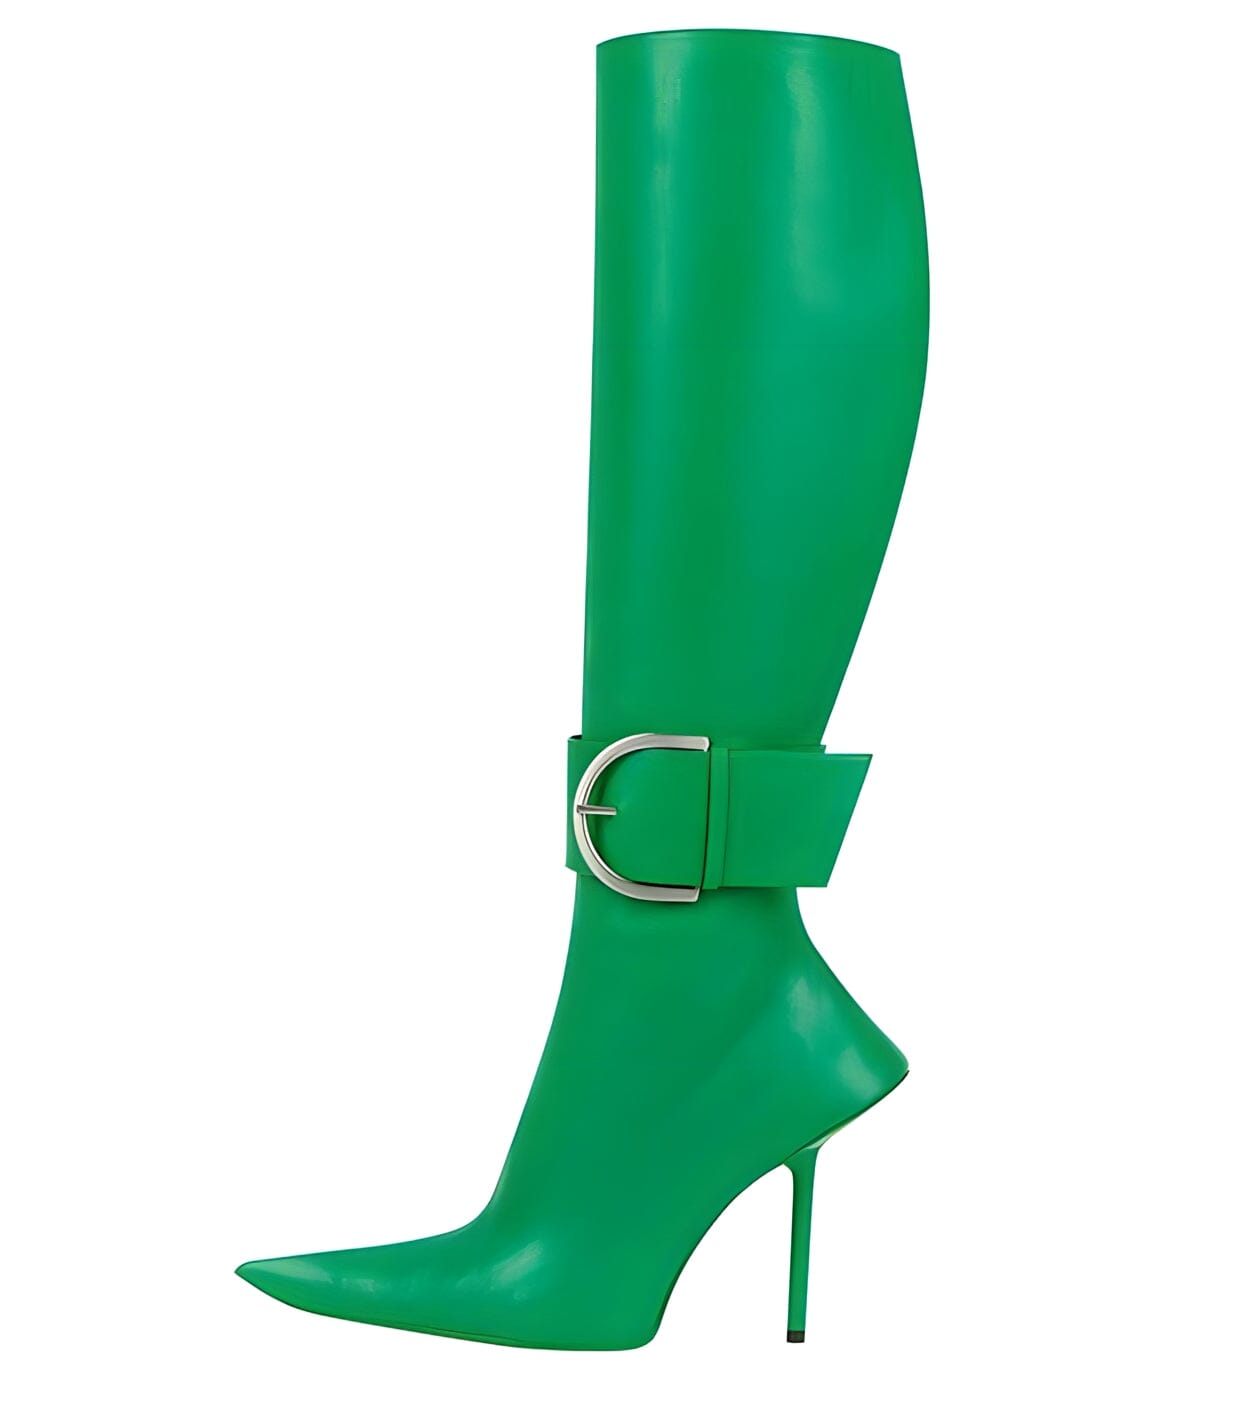 The Devlin Knee-High Boots - Multiple Colors 0 SA Styles Green EU 34 / US 4.5 